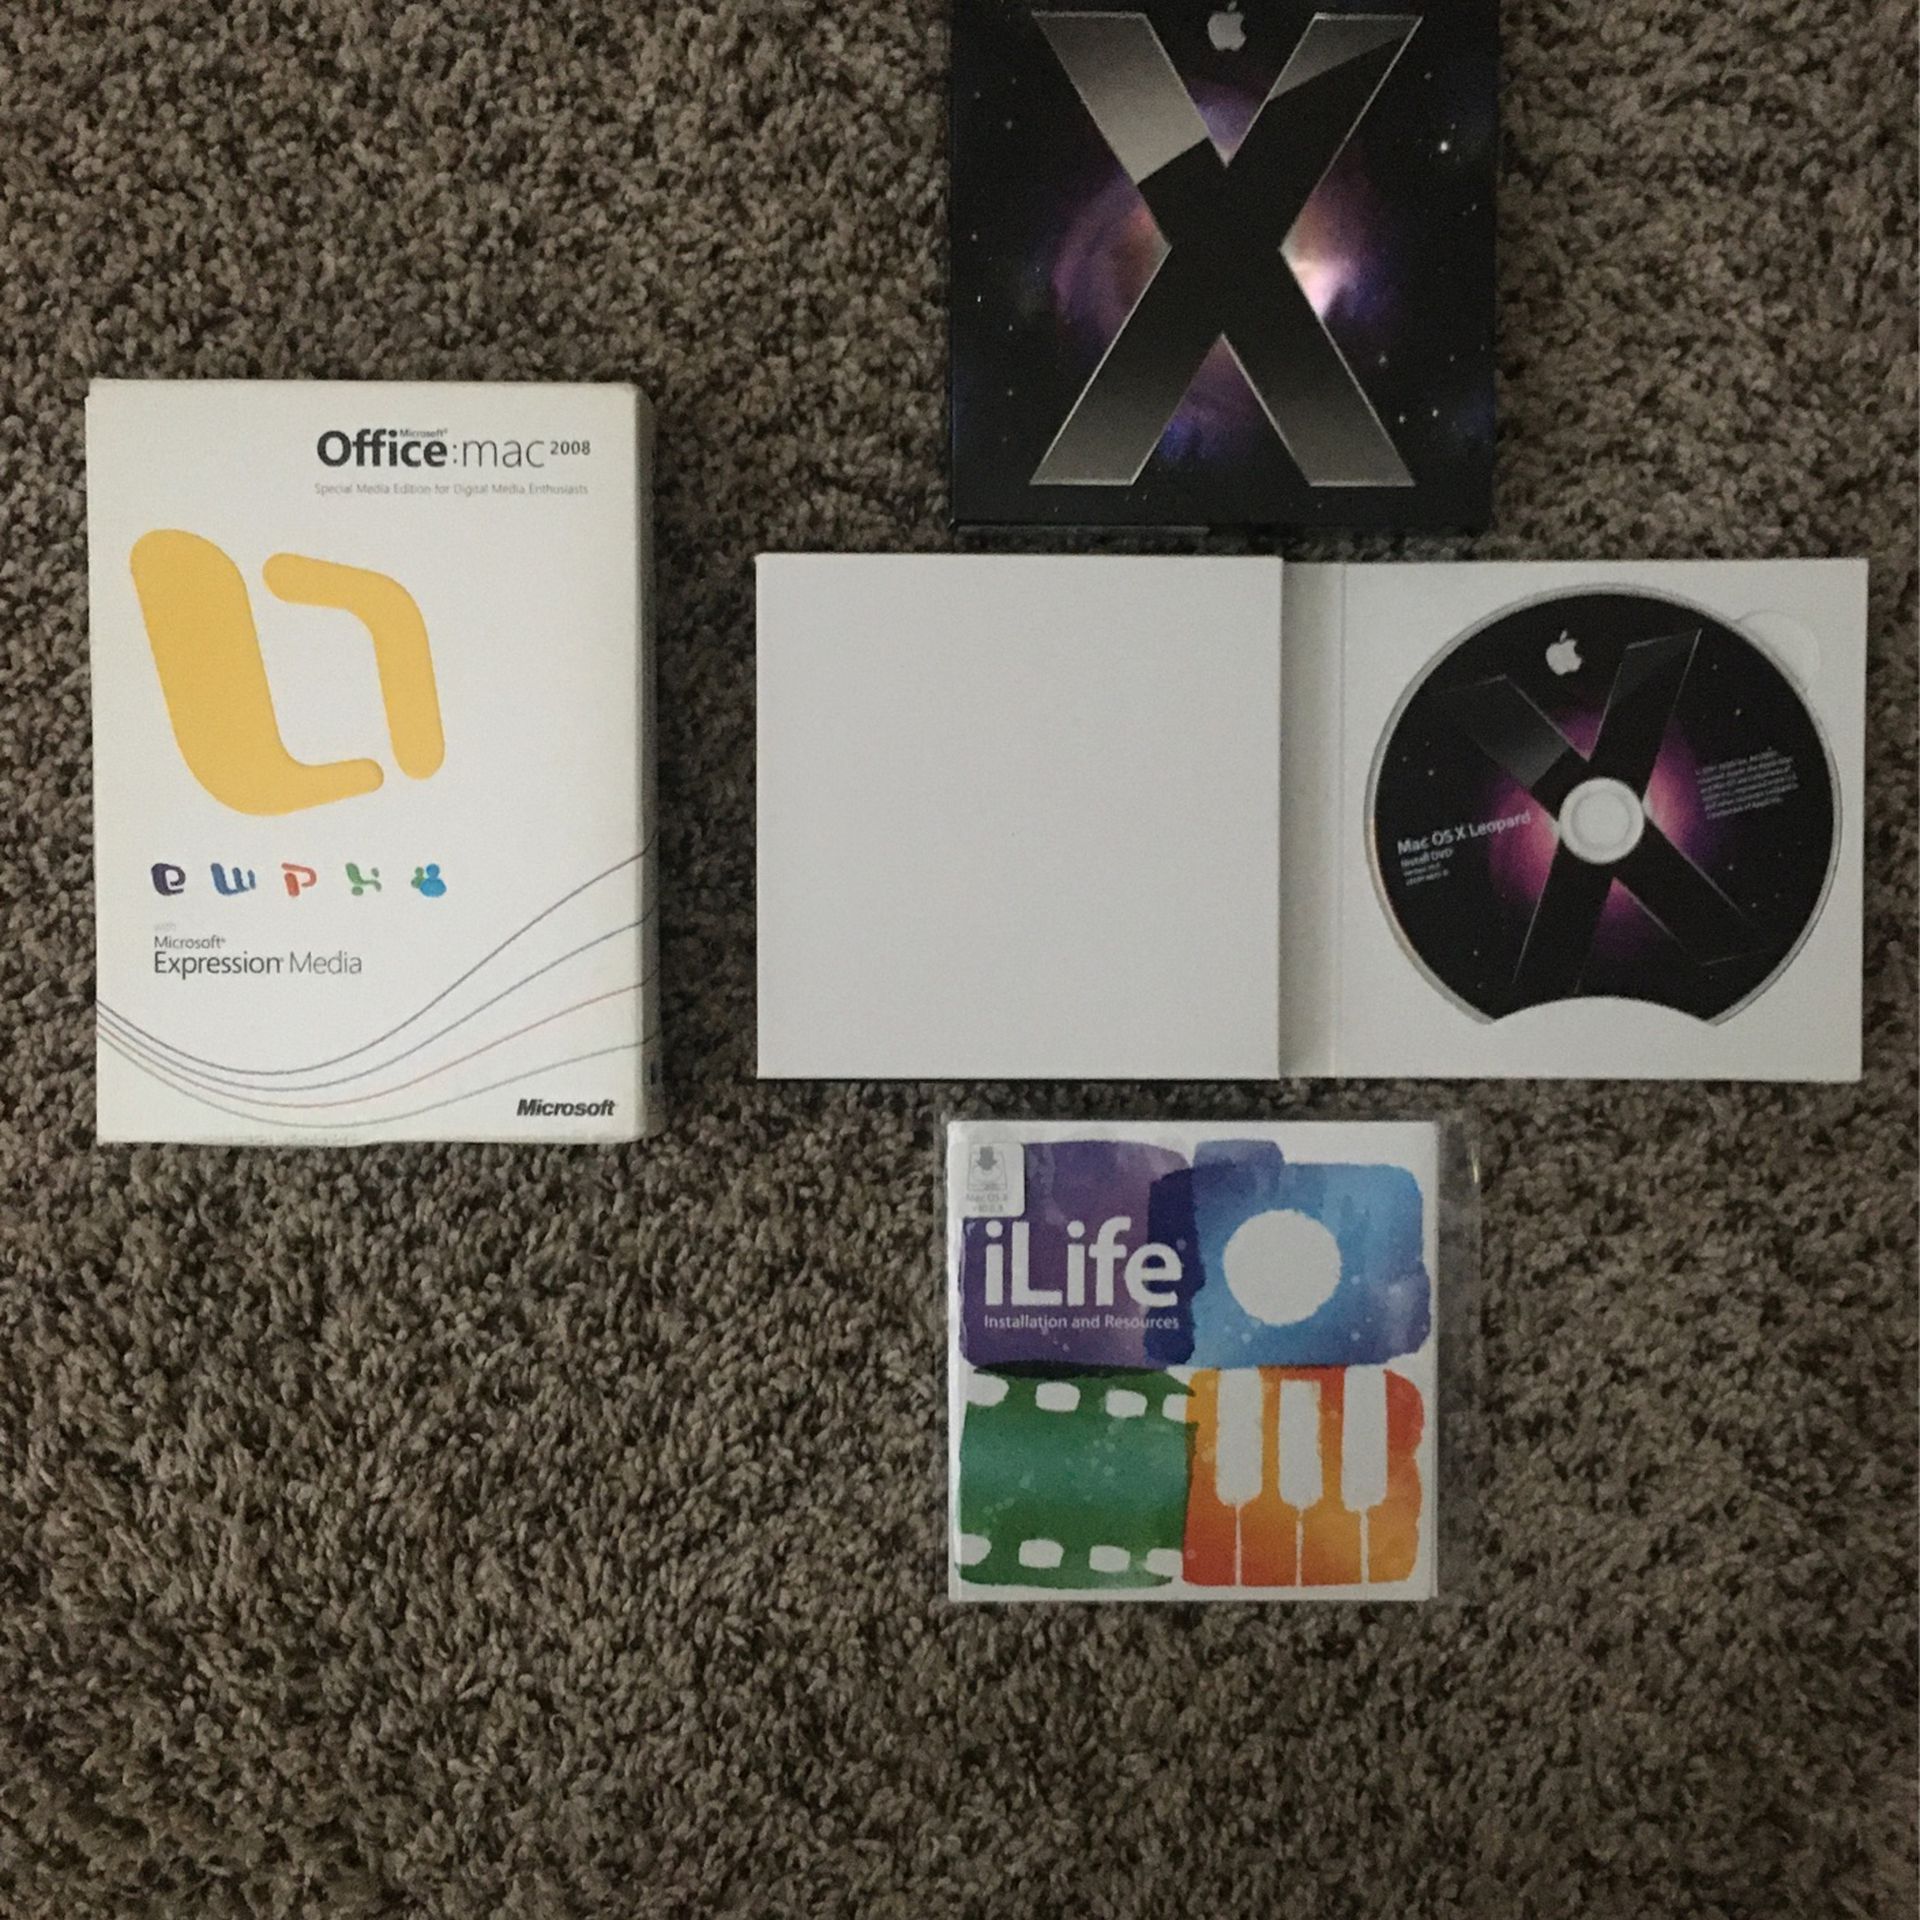 Mac OS X 10.5, iLife And Office 2008 Mac Special Media Edition CDs/DVDs